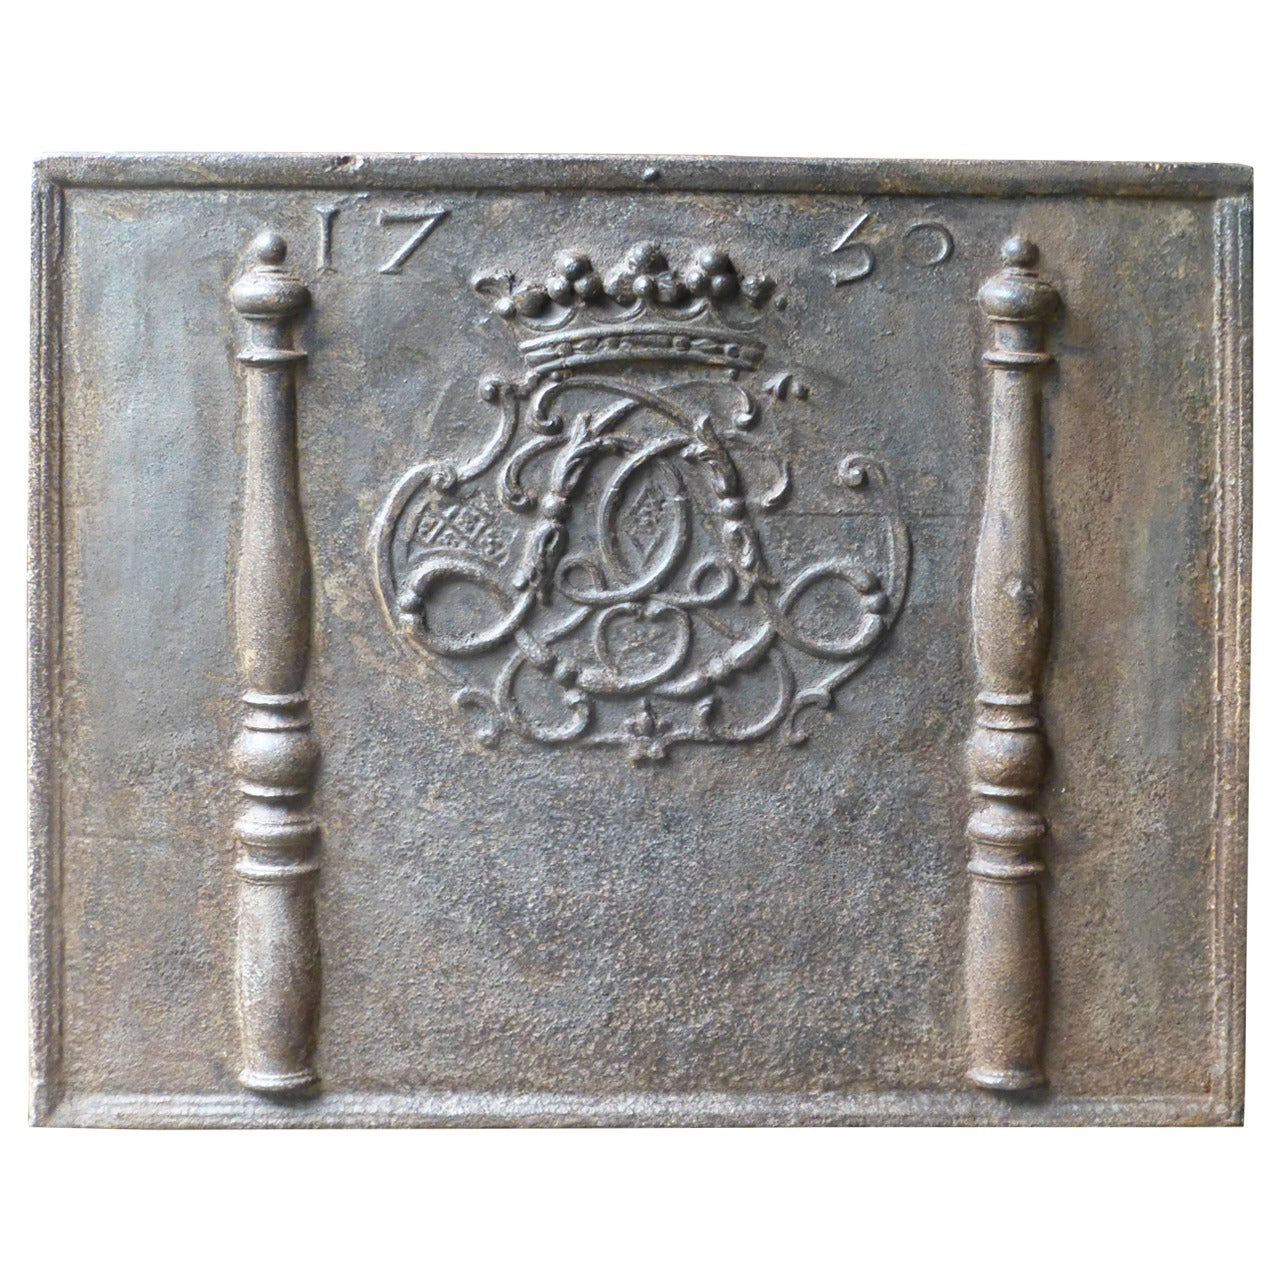 18th Century Monogram Fireback with the date 1730